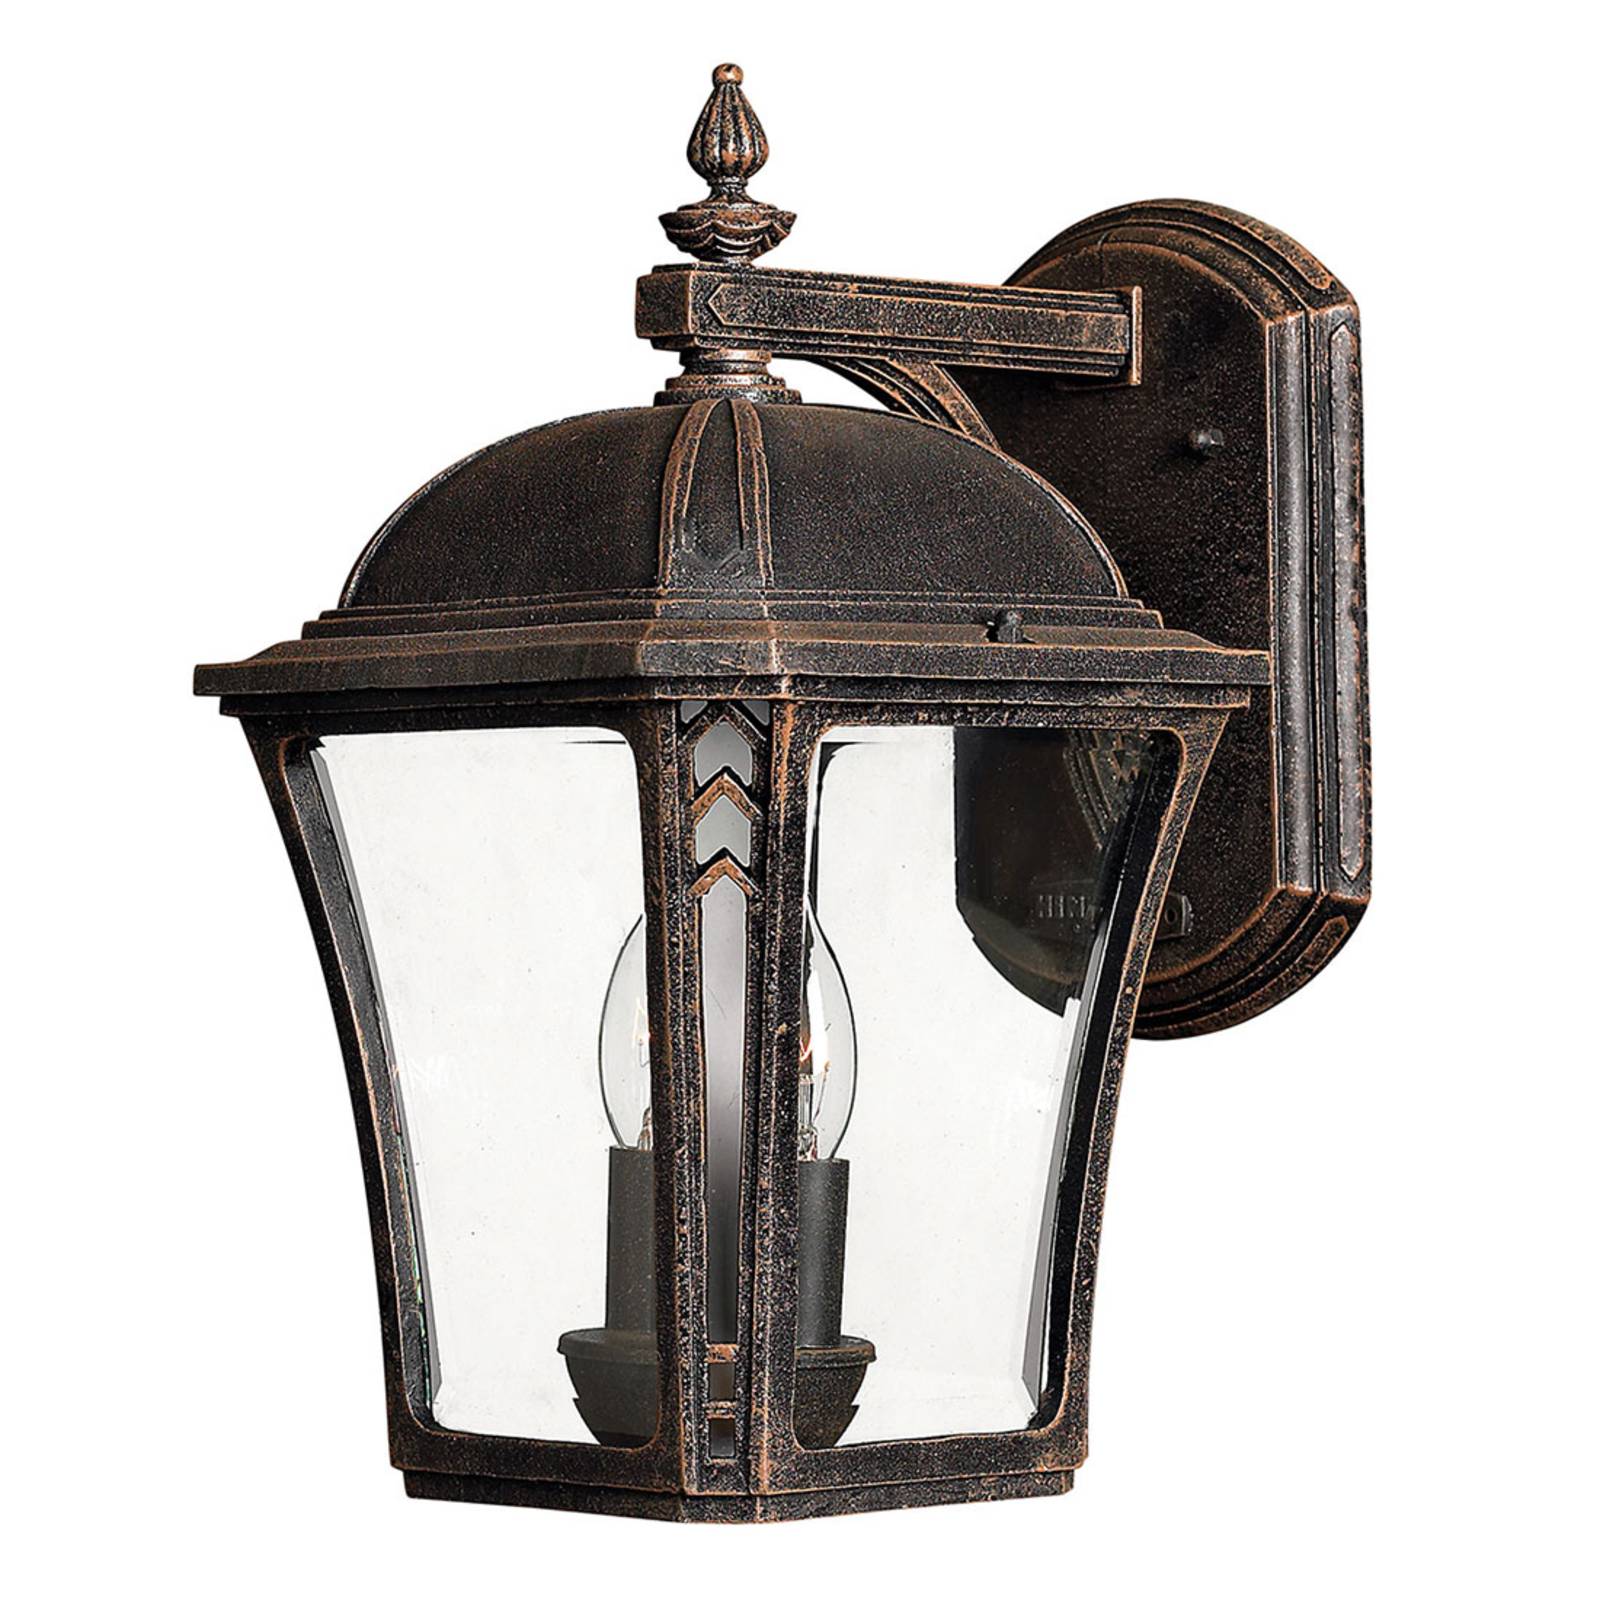 Wabash M outdoor wall light, height 34.9 cm